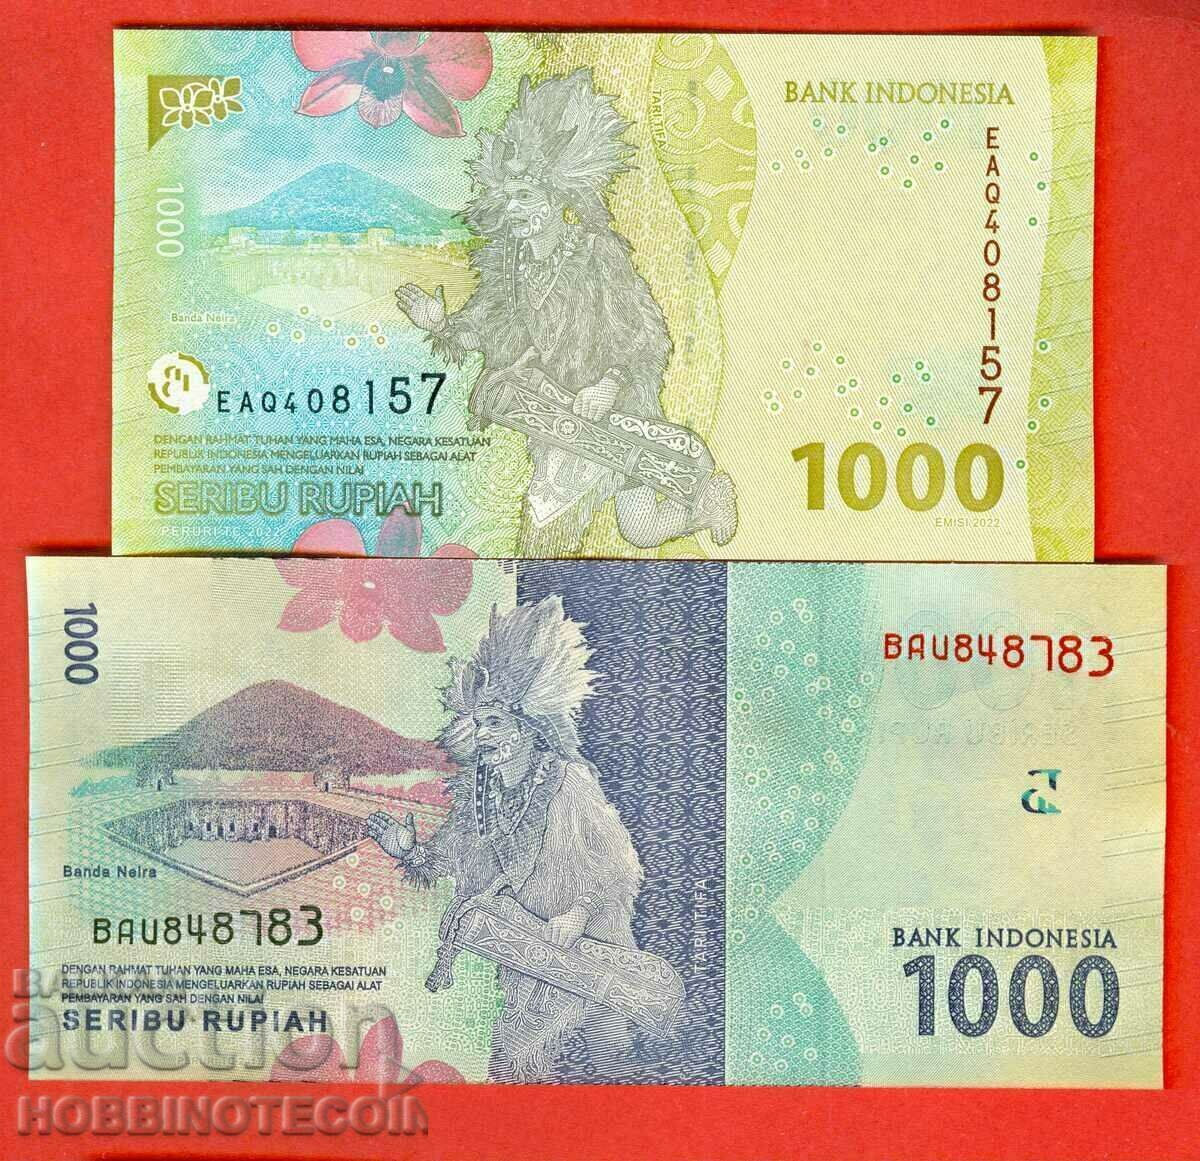 INDONESIA INDONESIA 1000 - 2016 and 1000 - 2022 NEW UNC